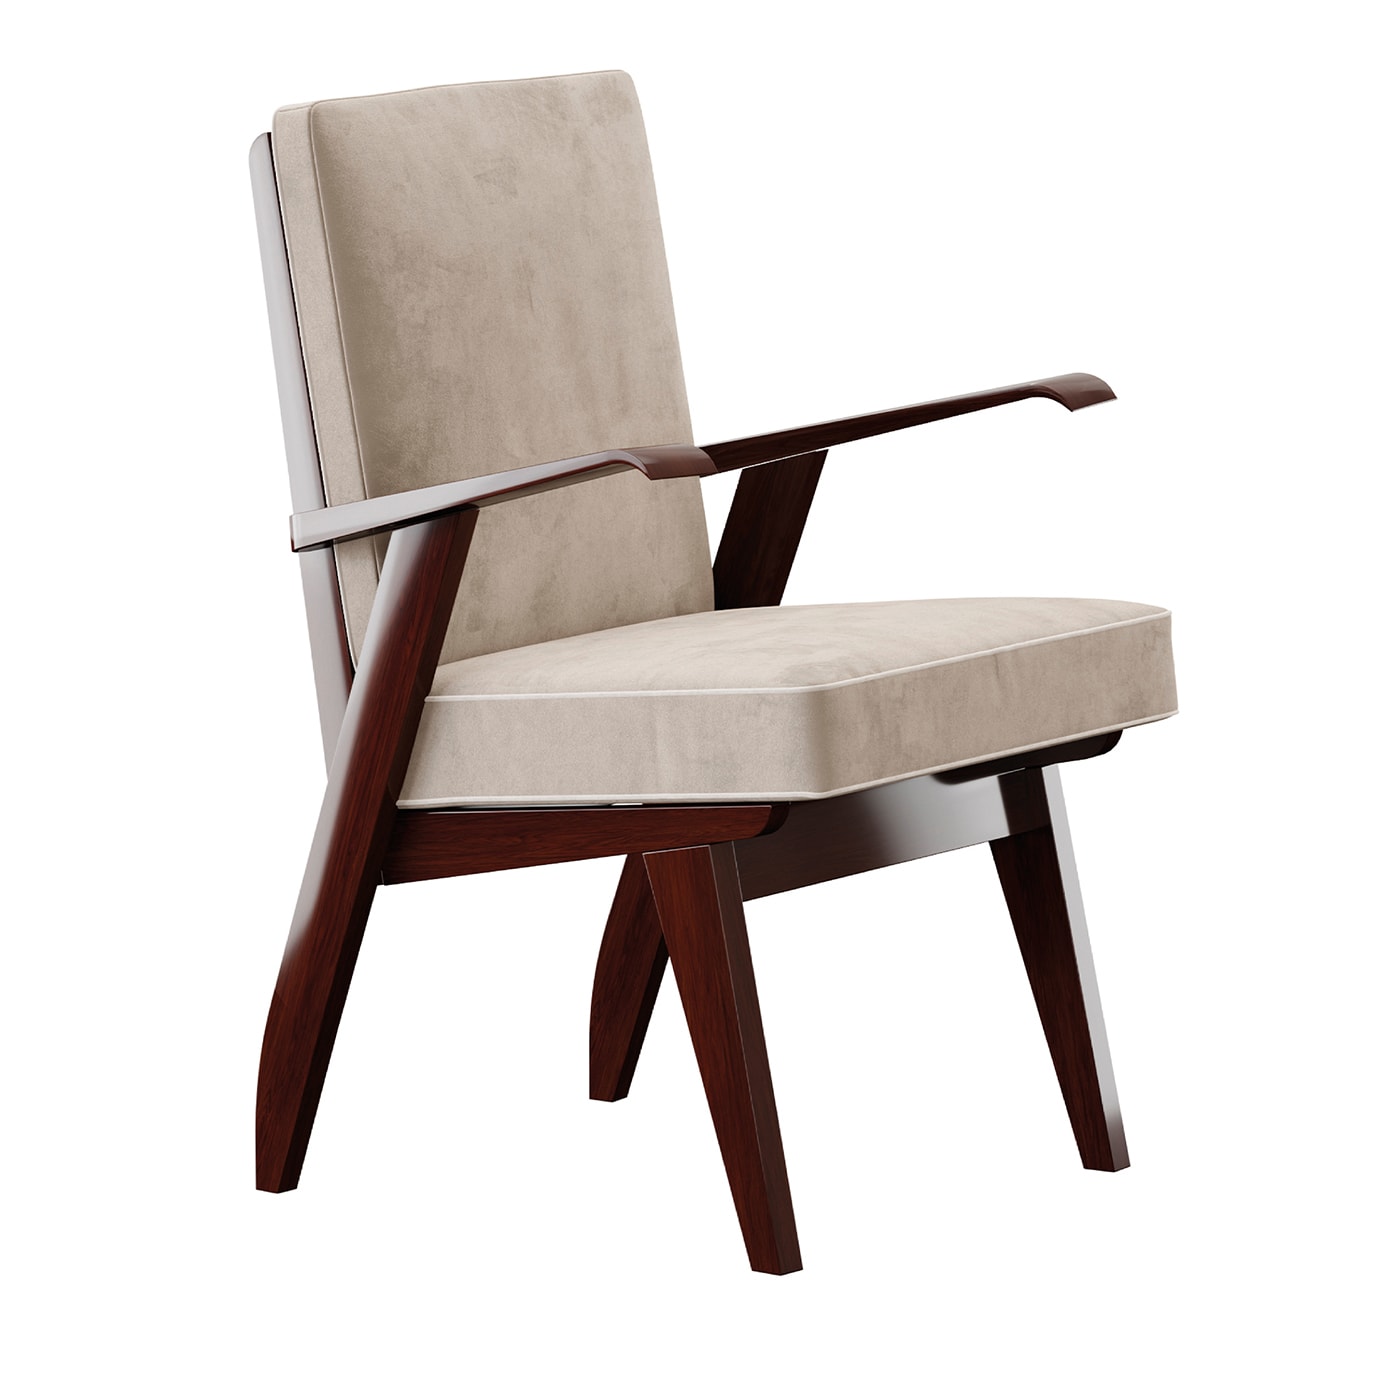 CHRIS Chair with armrests - Michele Bönan Interiors